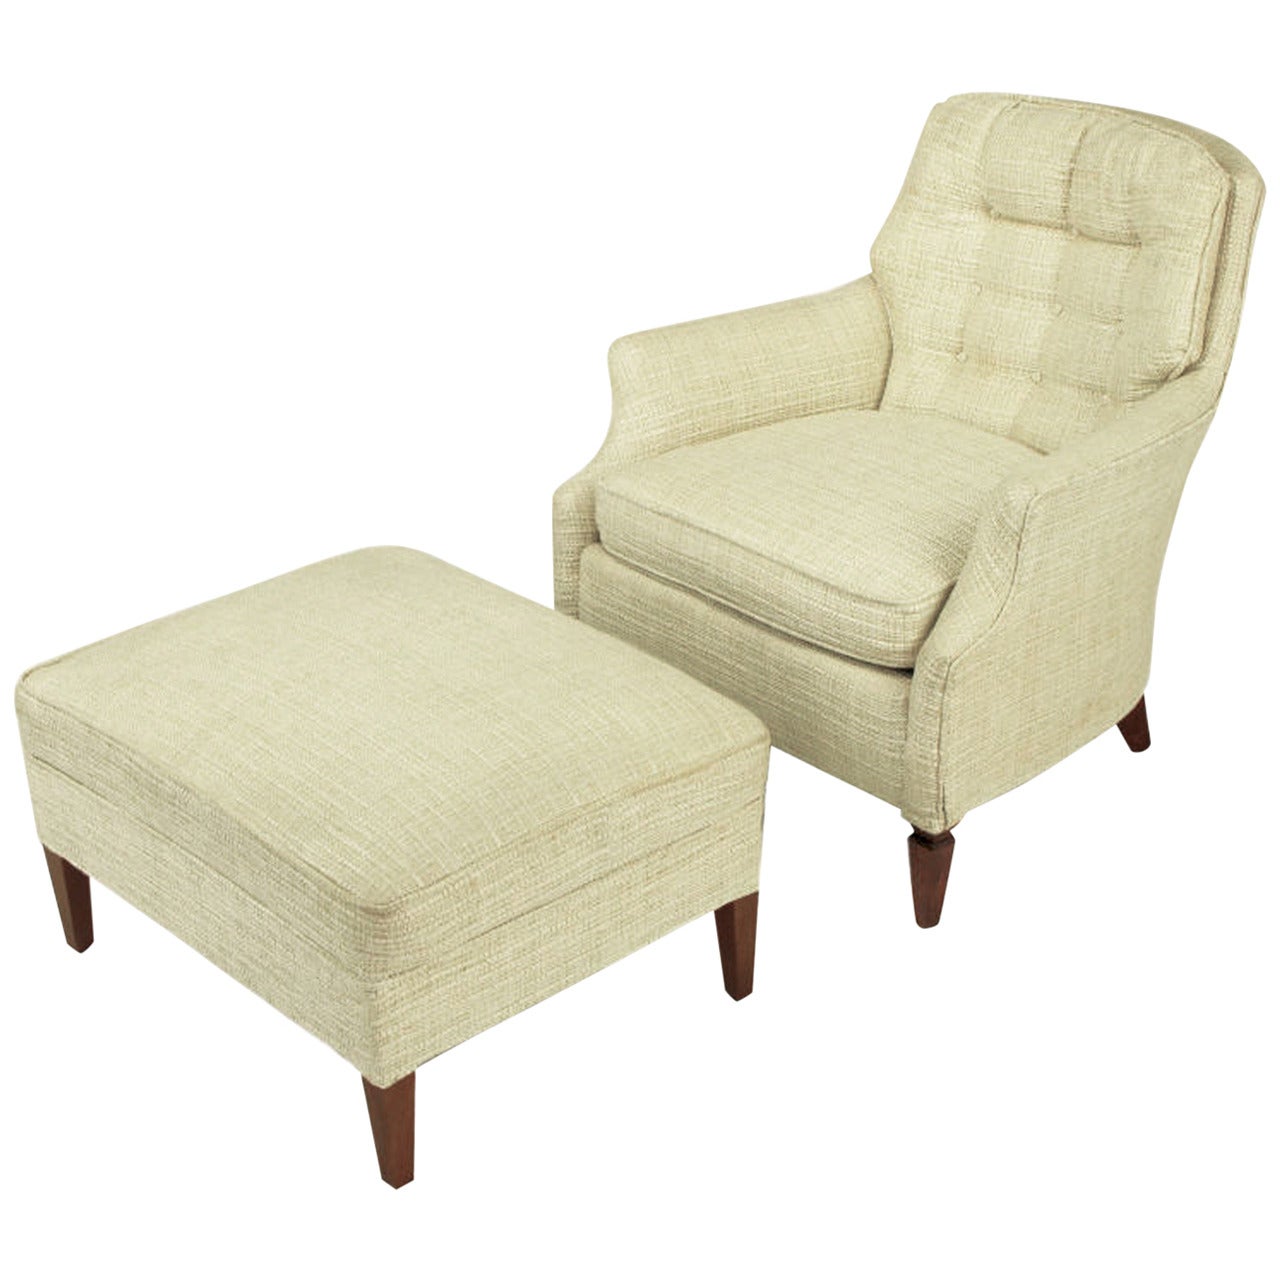 Button Tufted Creamy Linen Lounge Chair and Ottoman